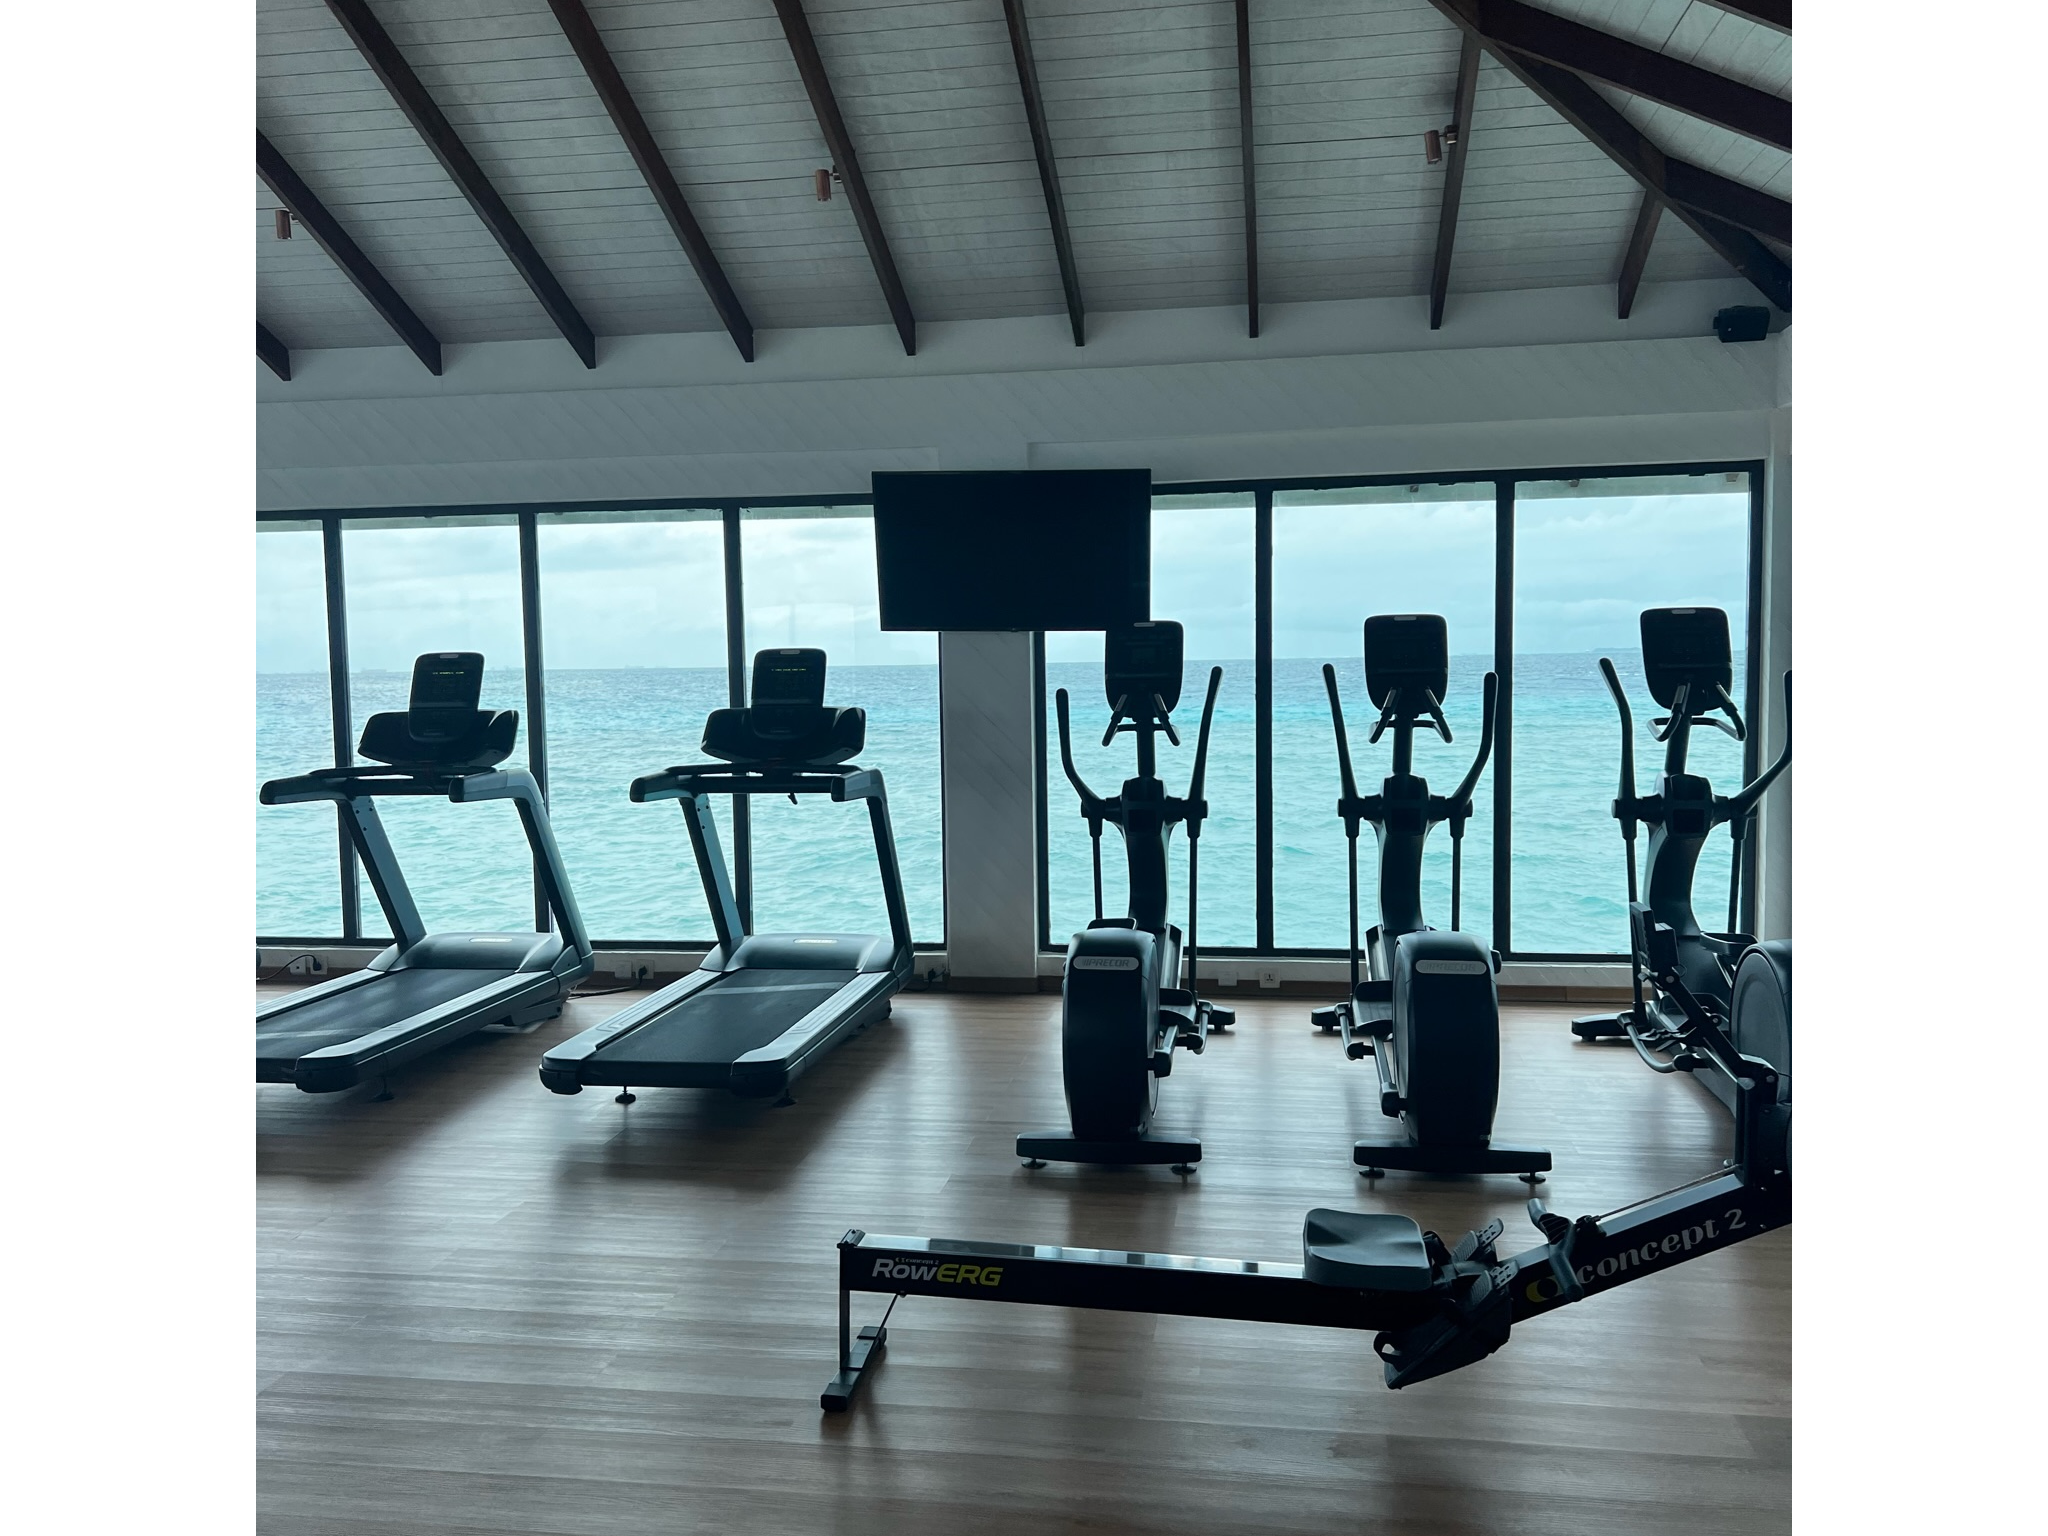 The resort’s overwater fitness centre boasts large windows